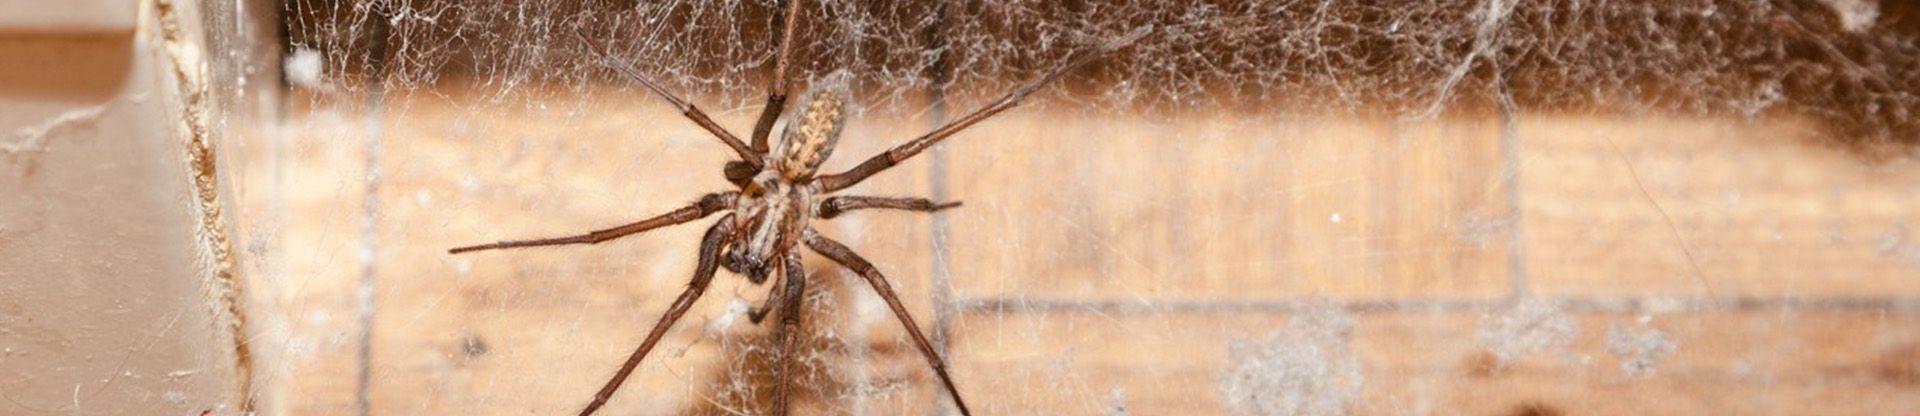 residential and commercial pest control for spiders